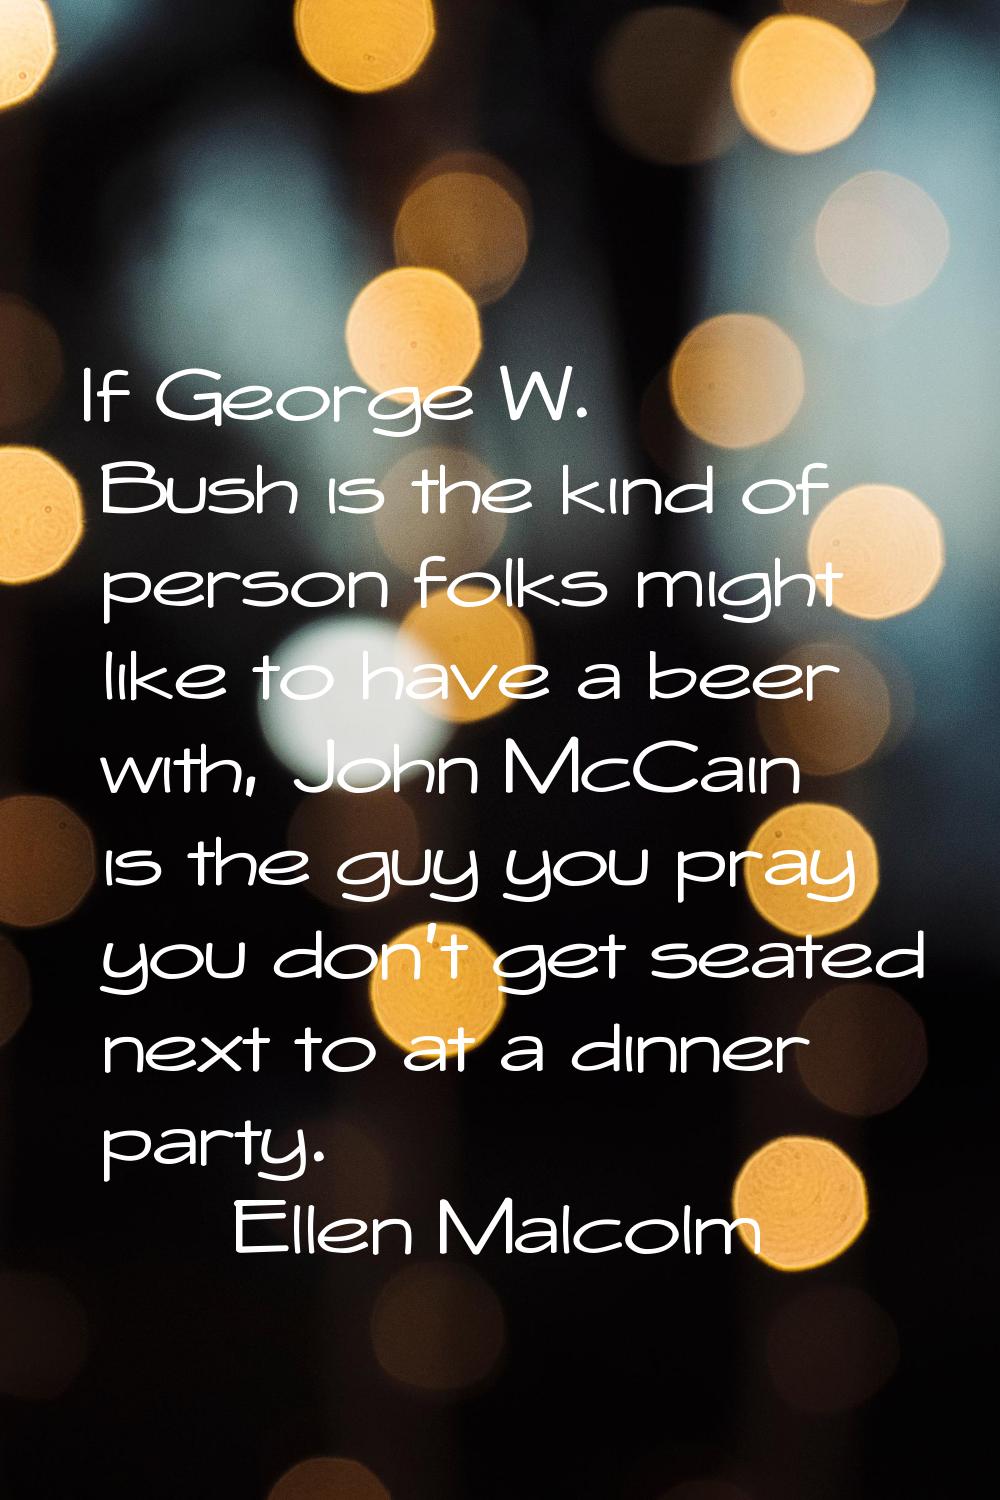 If George W. Bush is the kind of person folks might like to have a beer with, John McCain is the gu